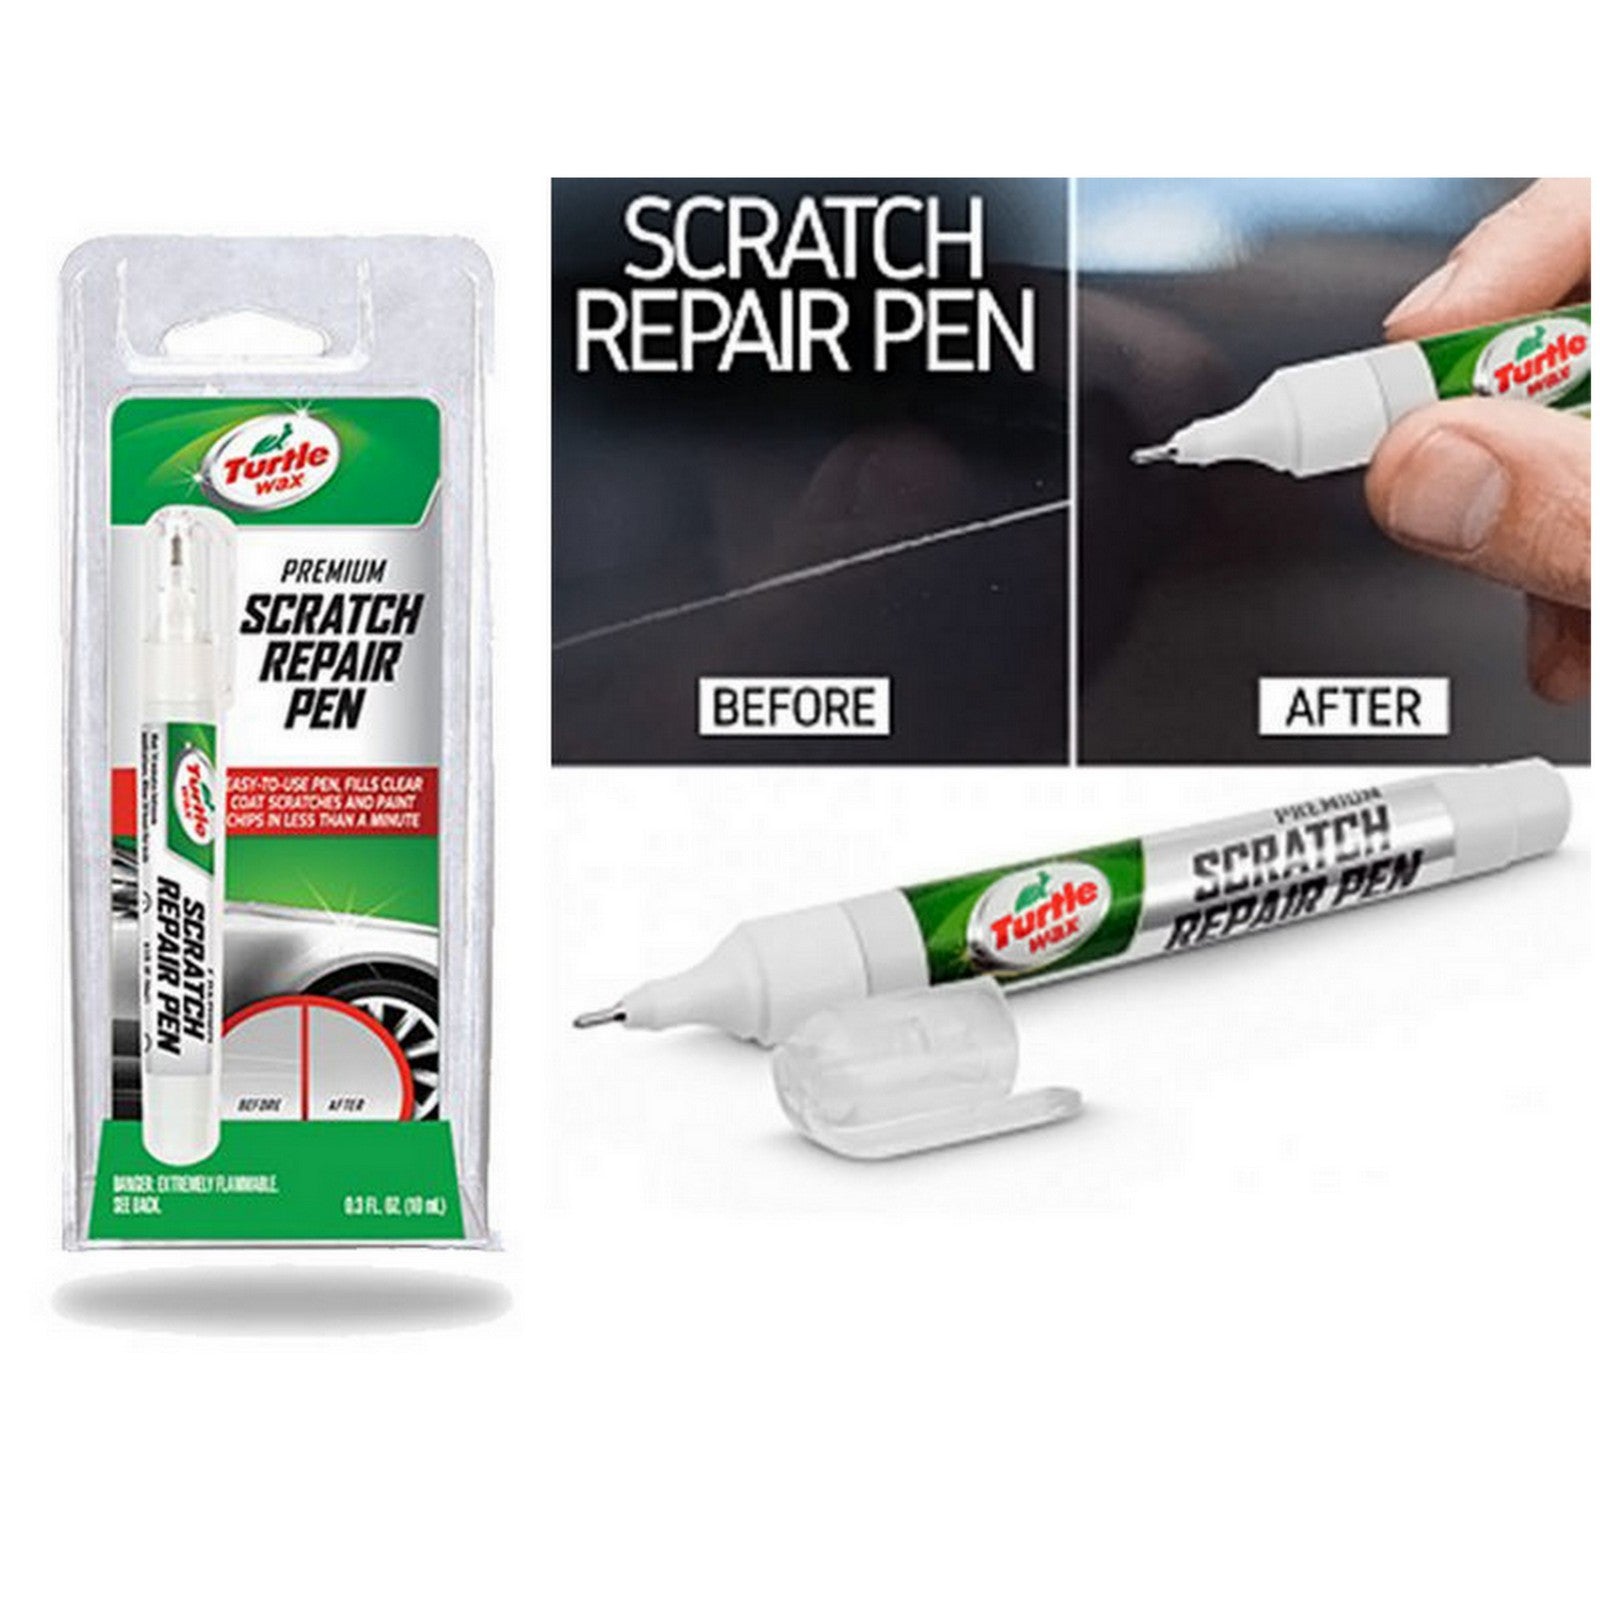 How to Repair A Scratch On My Car using Turtle Wax® Scratch Repair Kit on  Vimeo